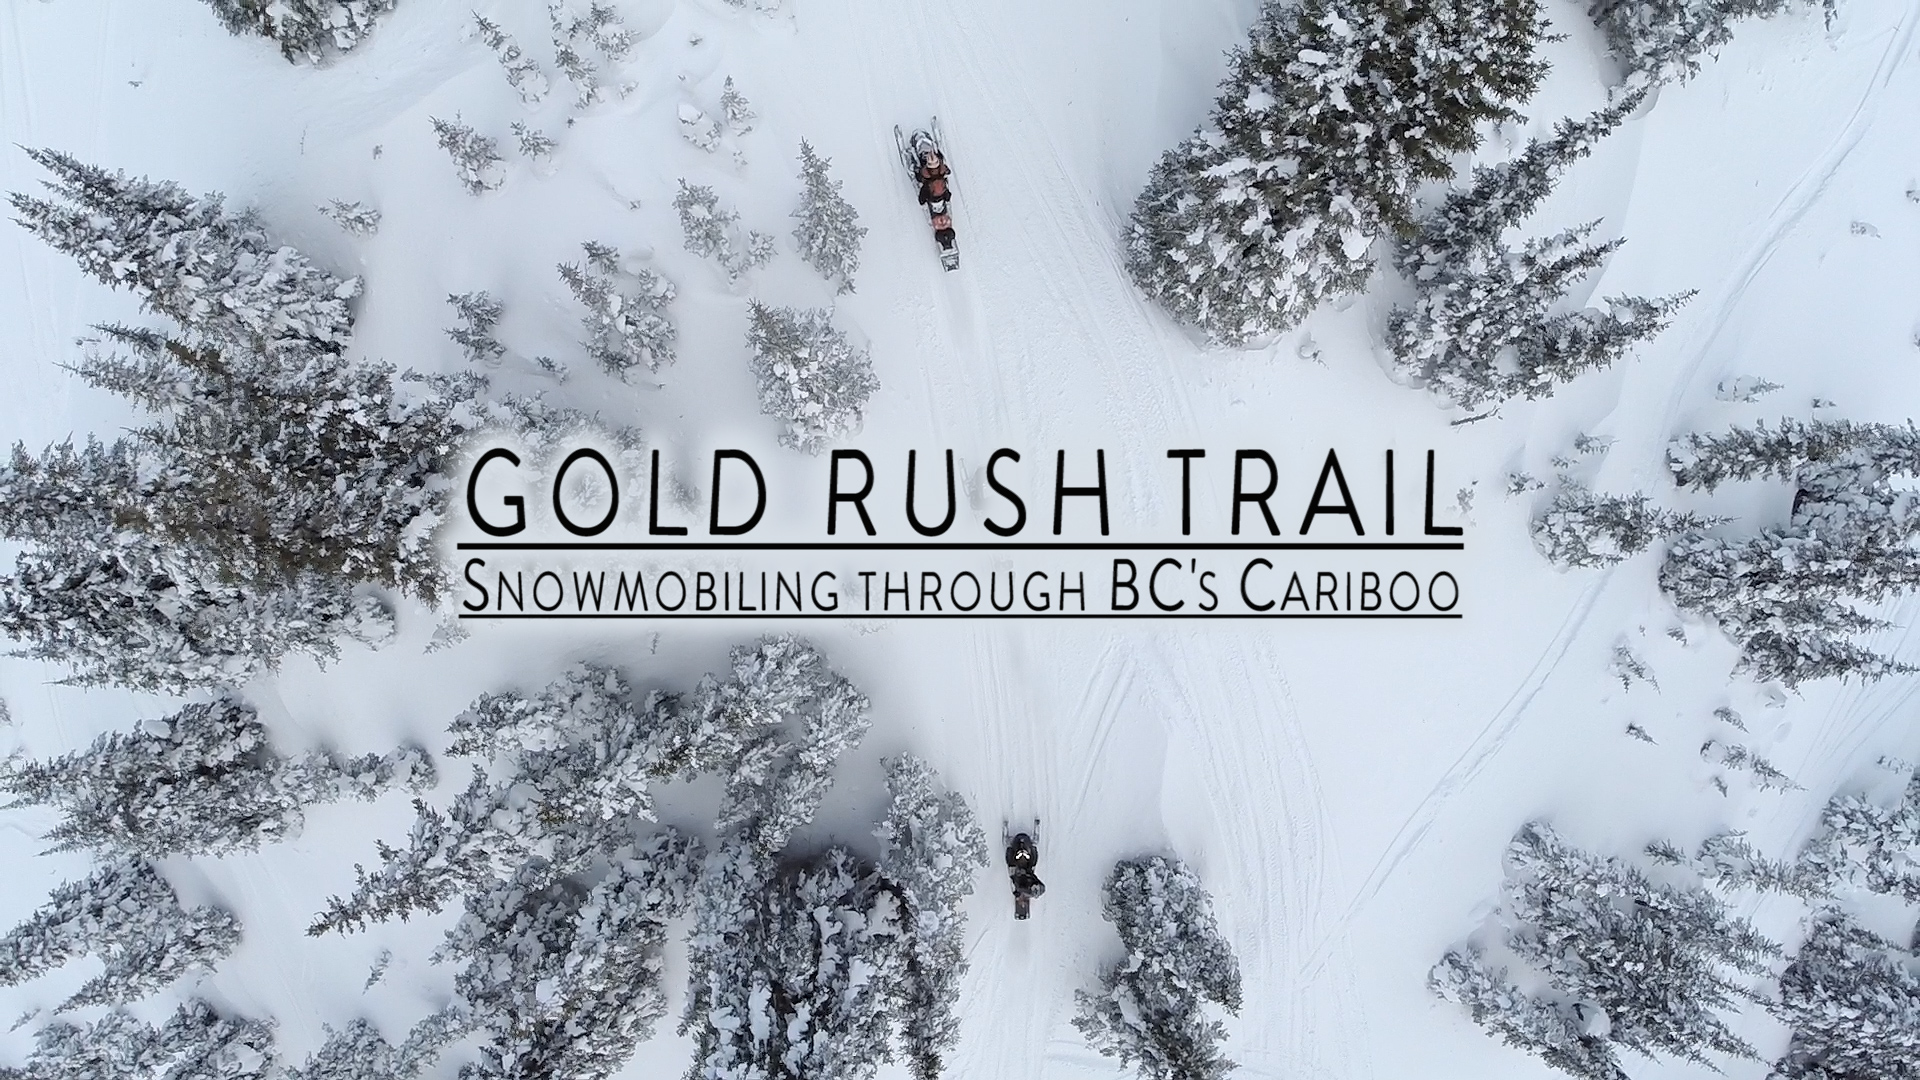 Gold Rush Trail: Snowmobiling Though BC’s Cariboo